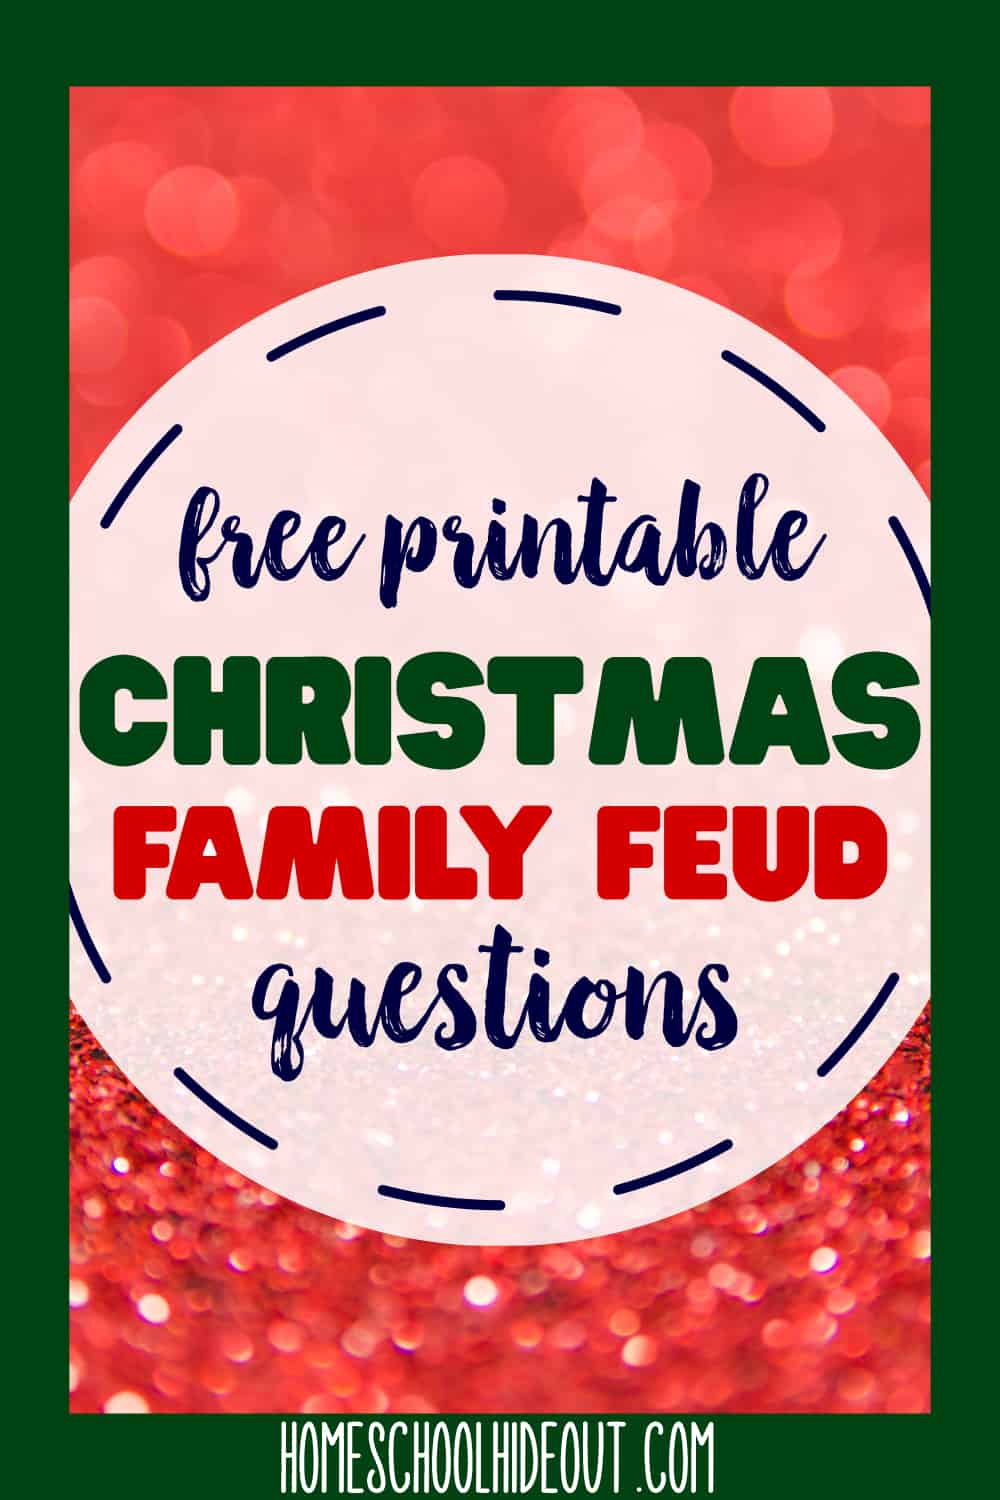 These FREE printable Family Feud Christmas questions are amazing! Our party is gonna ROCK and best of all, no prep is needed! #christmasgames #familyfeud #partygames